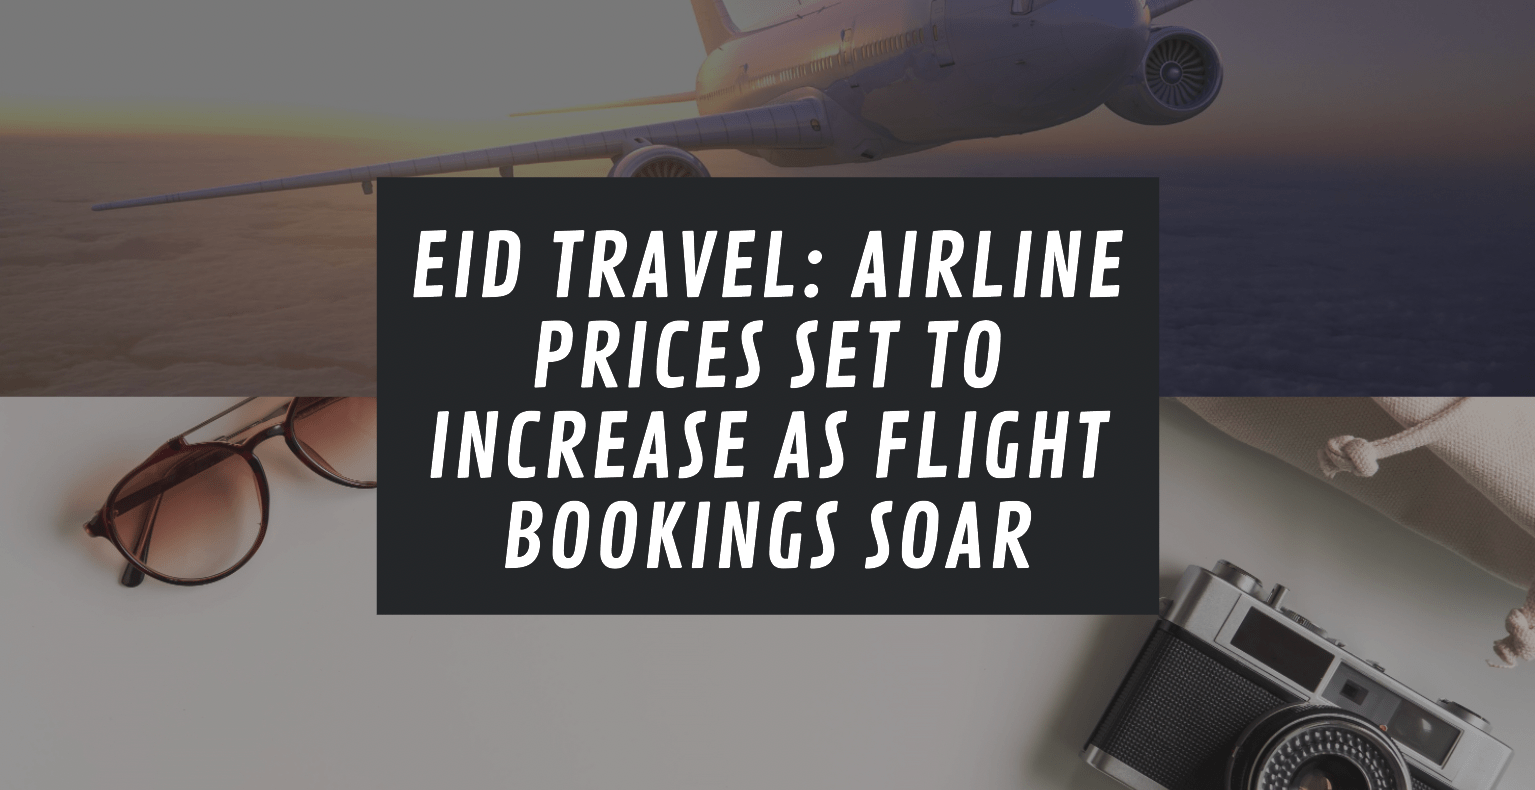 Eid Travel Alert: Expect Higher Airline Prices as Flight Demand Rises